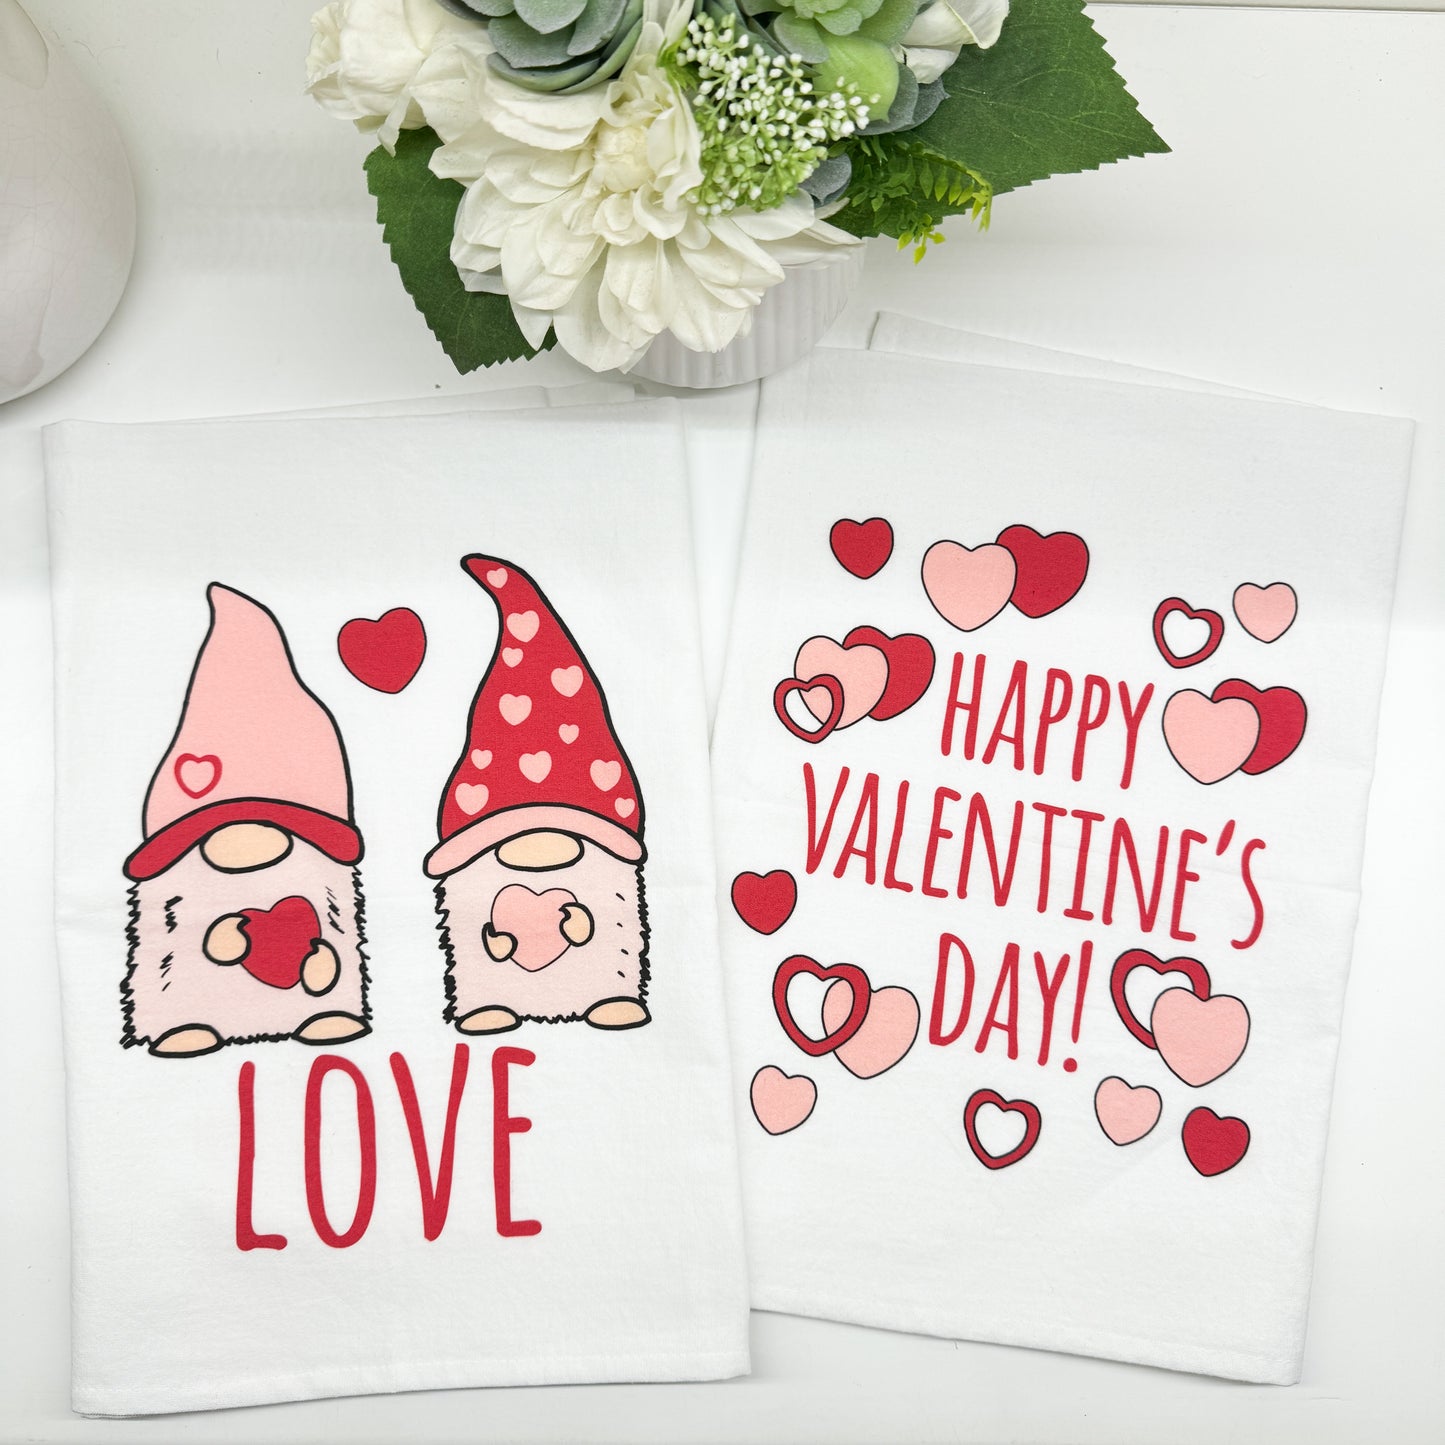 Happy Valentine's Day + Gnome Love - Set of 2 Full Color Dish Towels